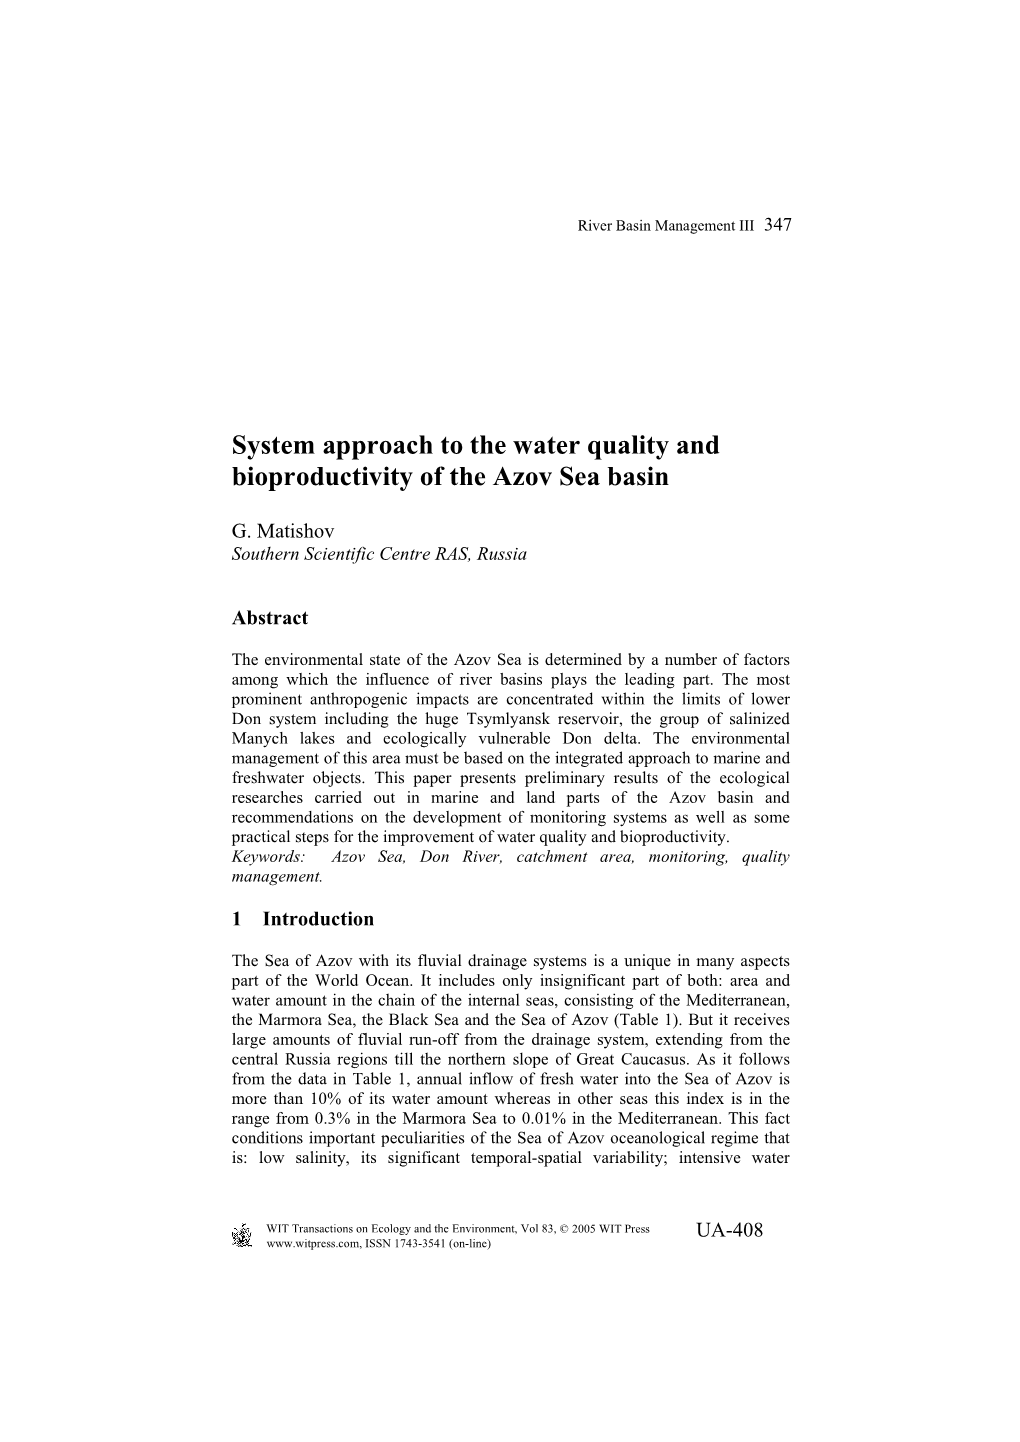 System Approach to the Water Quality and Bioproductivity of the Azov Sea Basin